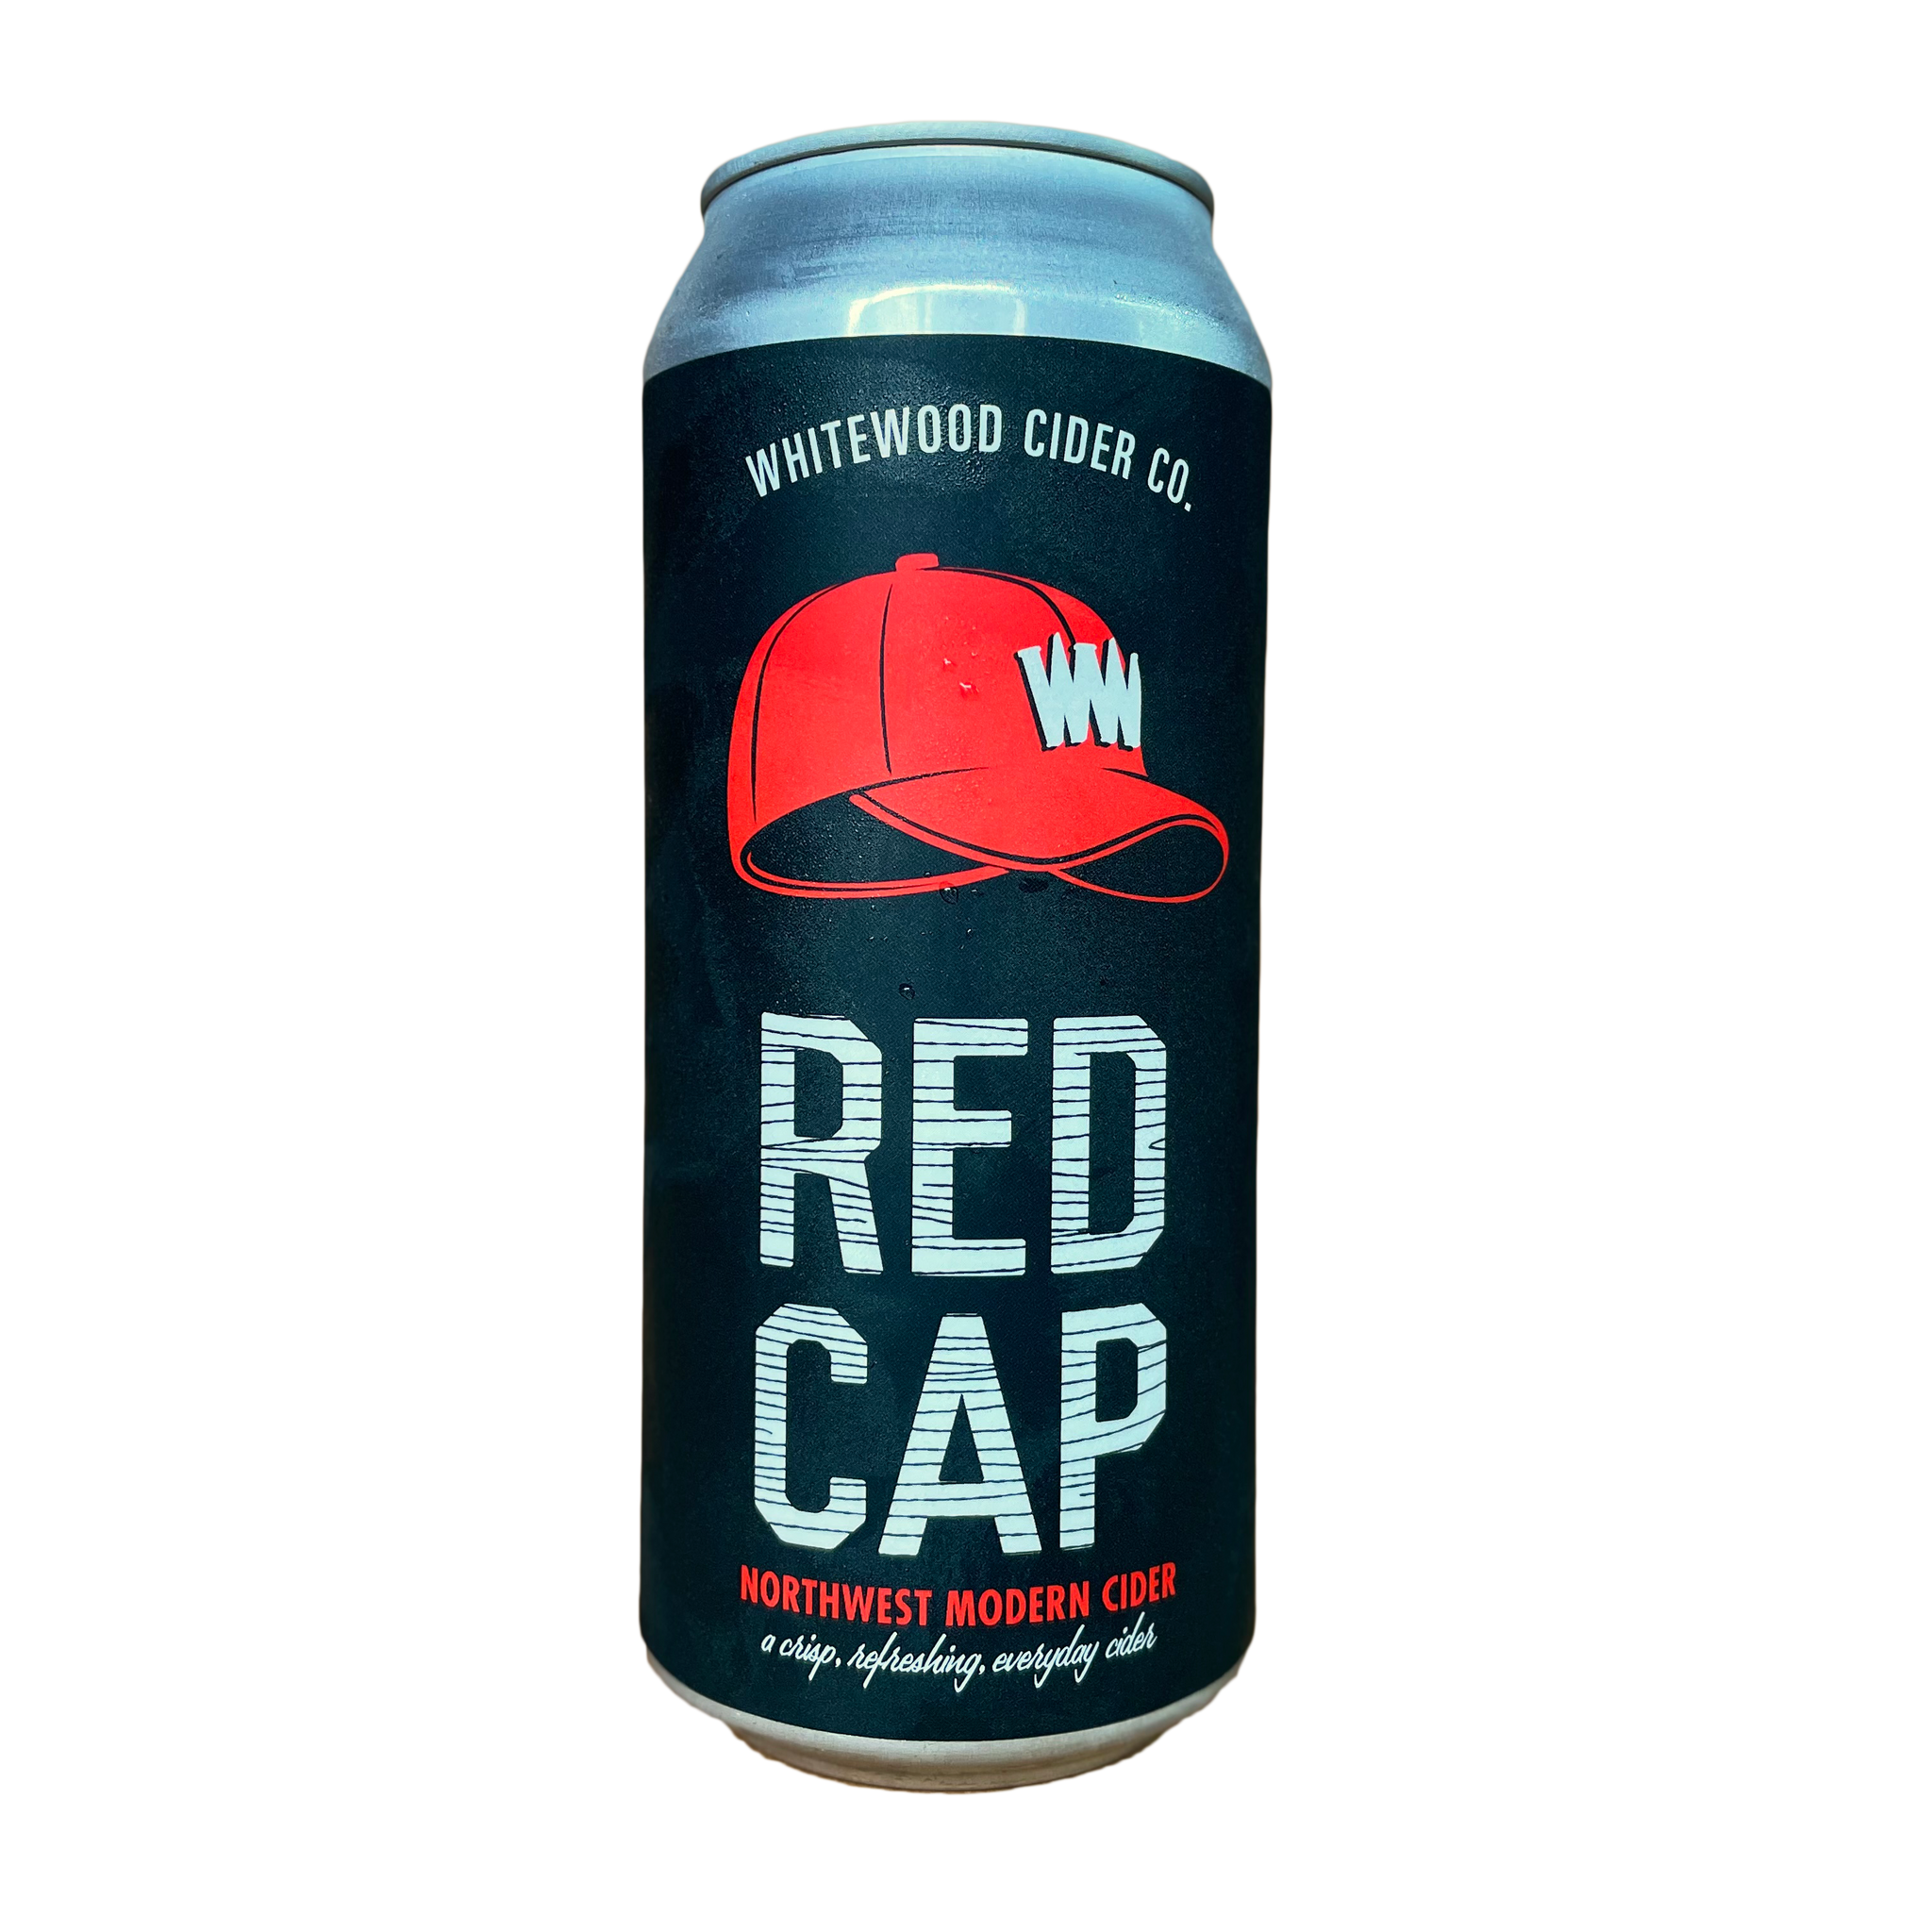 Whitewood's Red Cap Cider